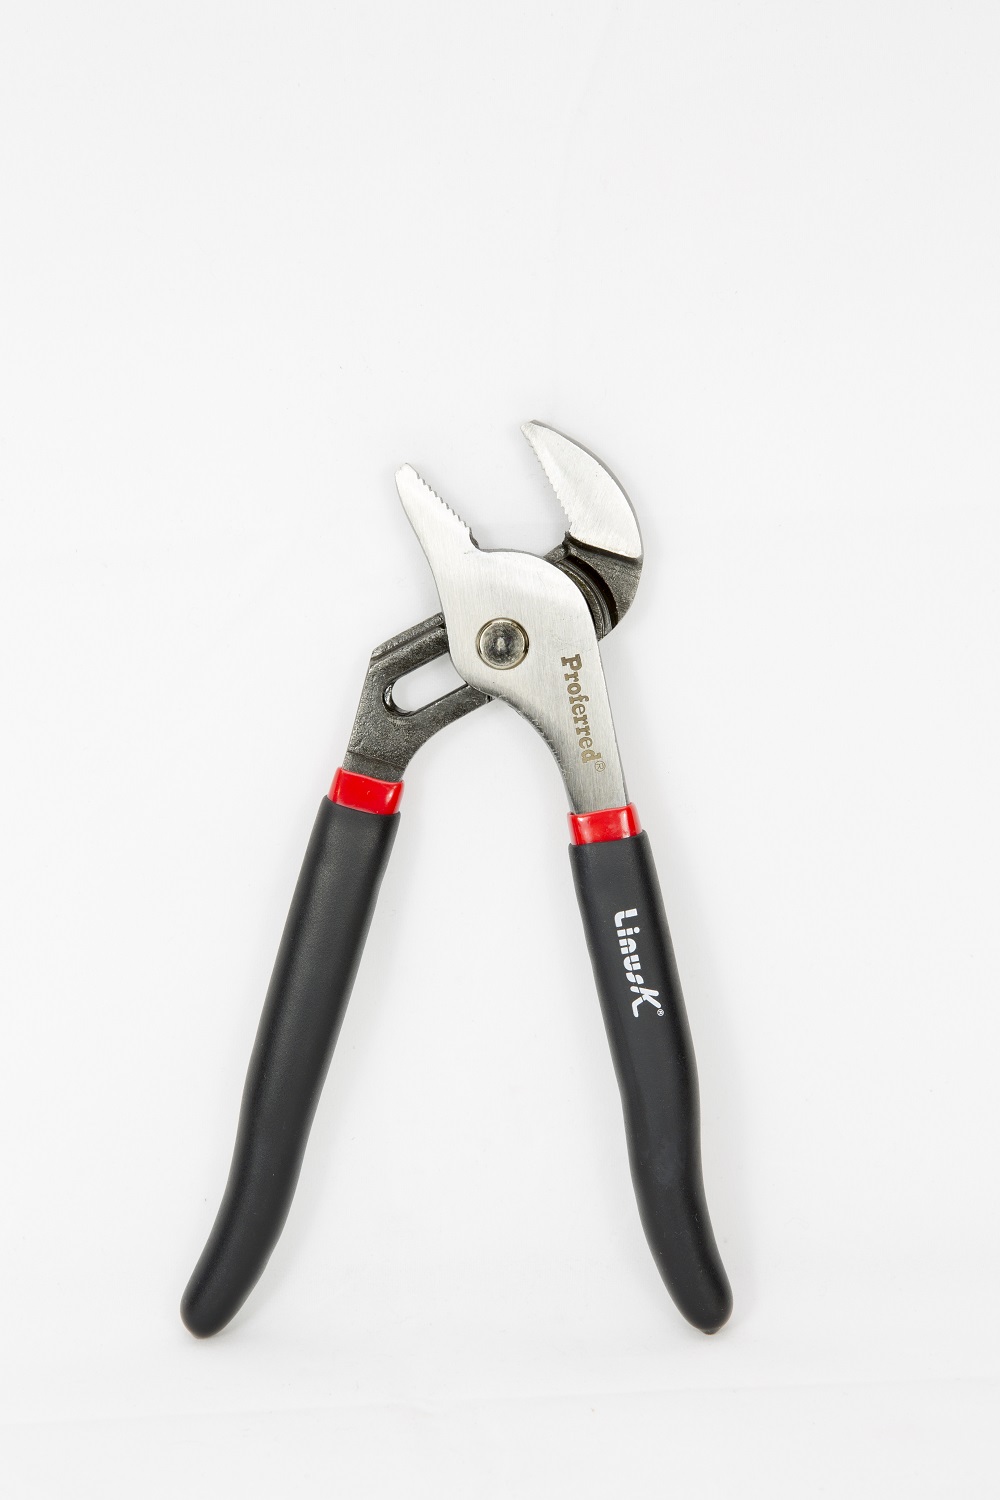 PROFERRED PLIERS STRAIGHT JAW GROOVE JOINT COATED GRIP 8'' 